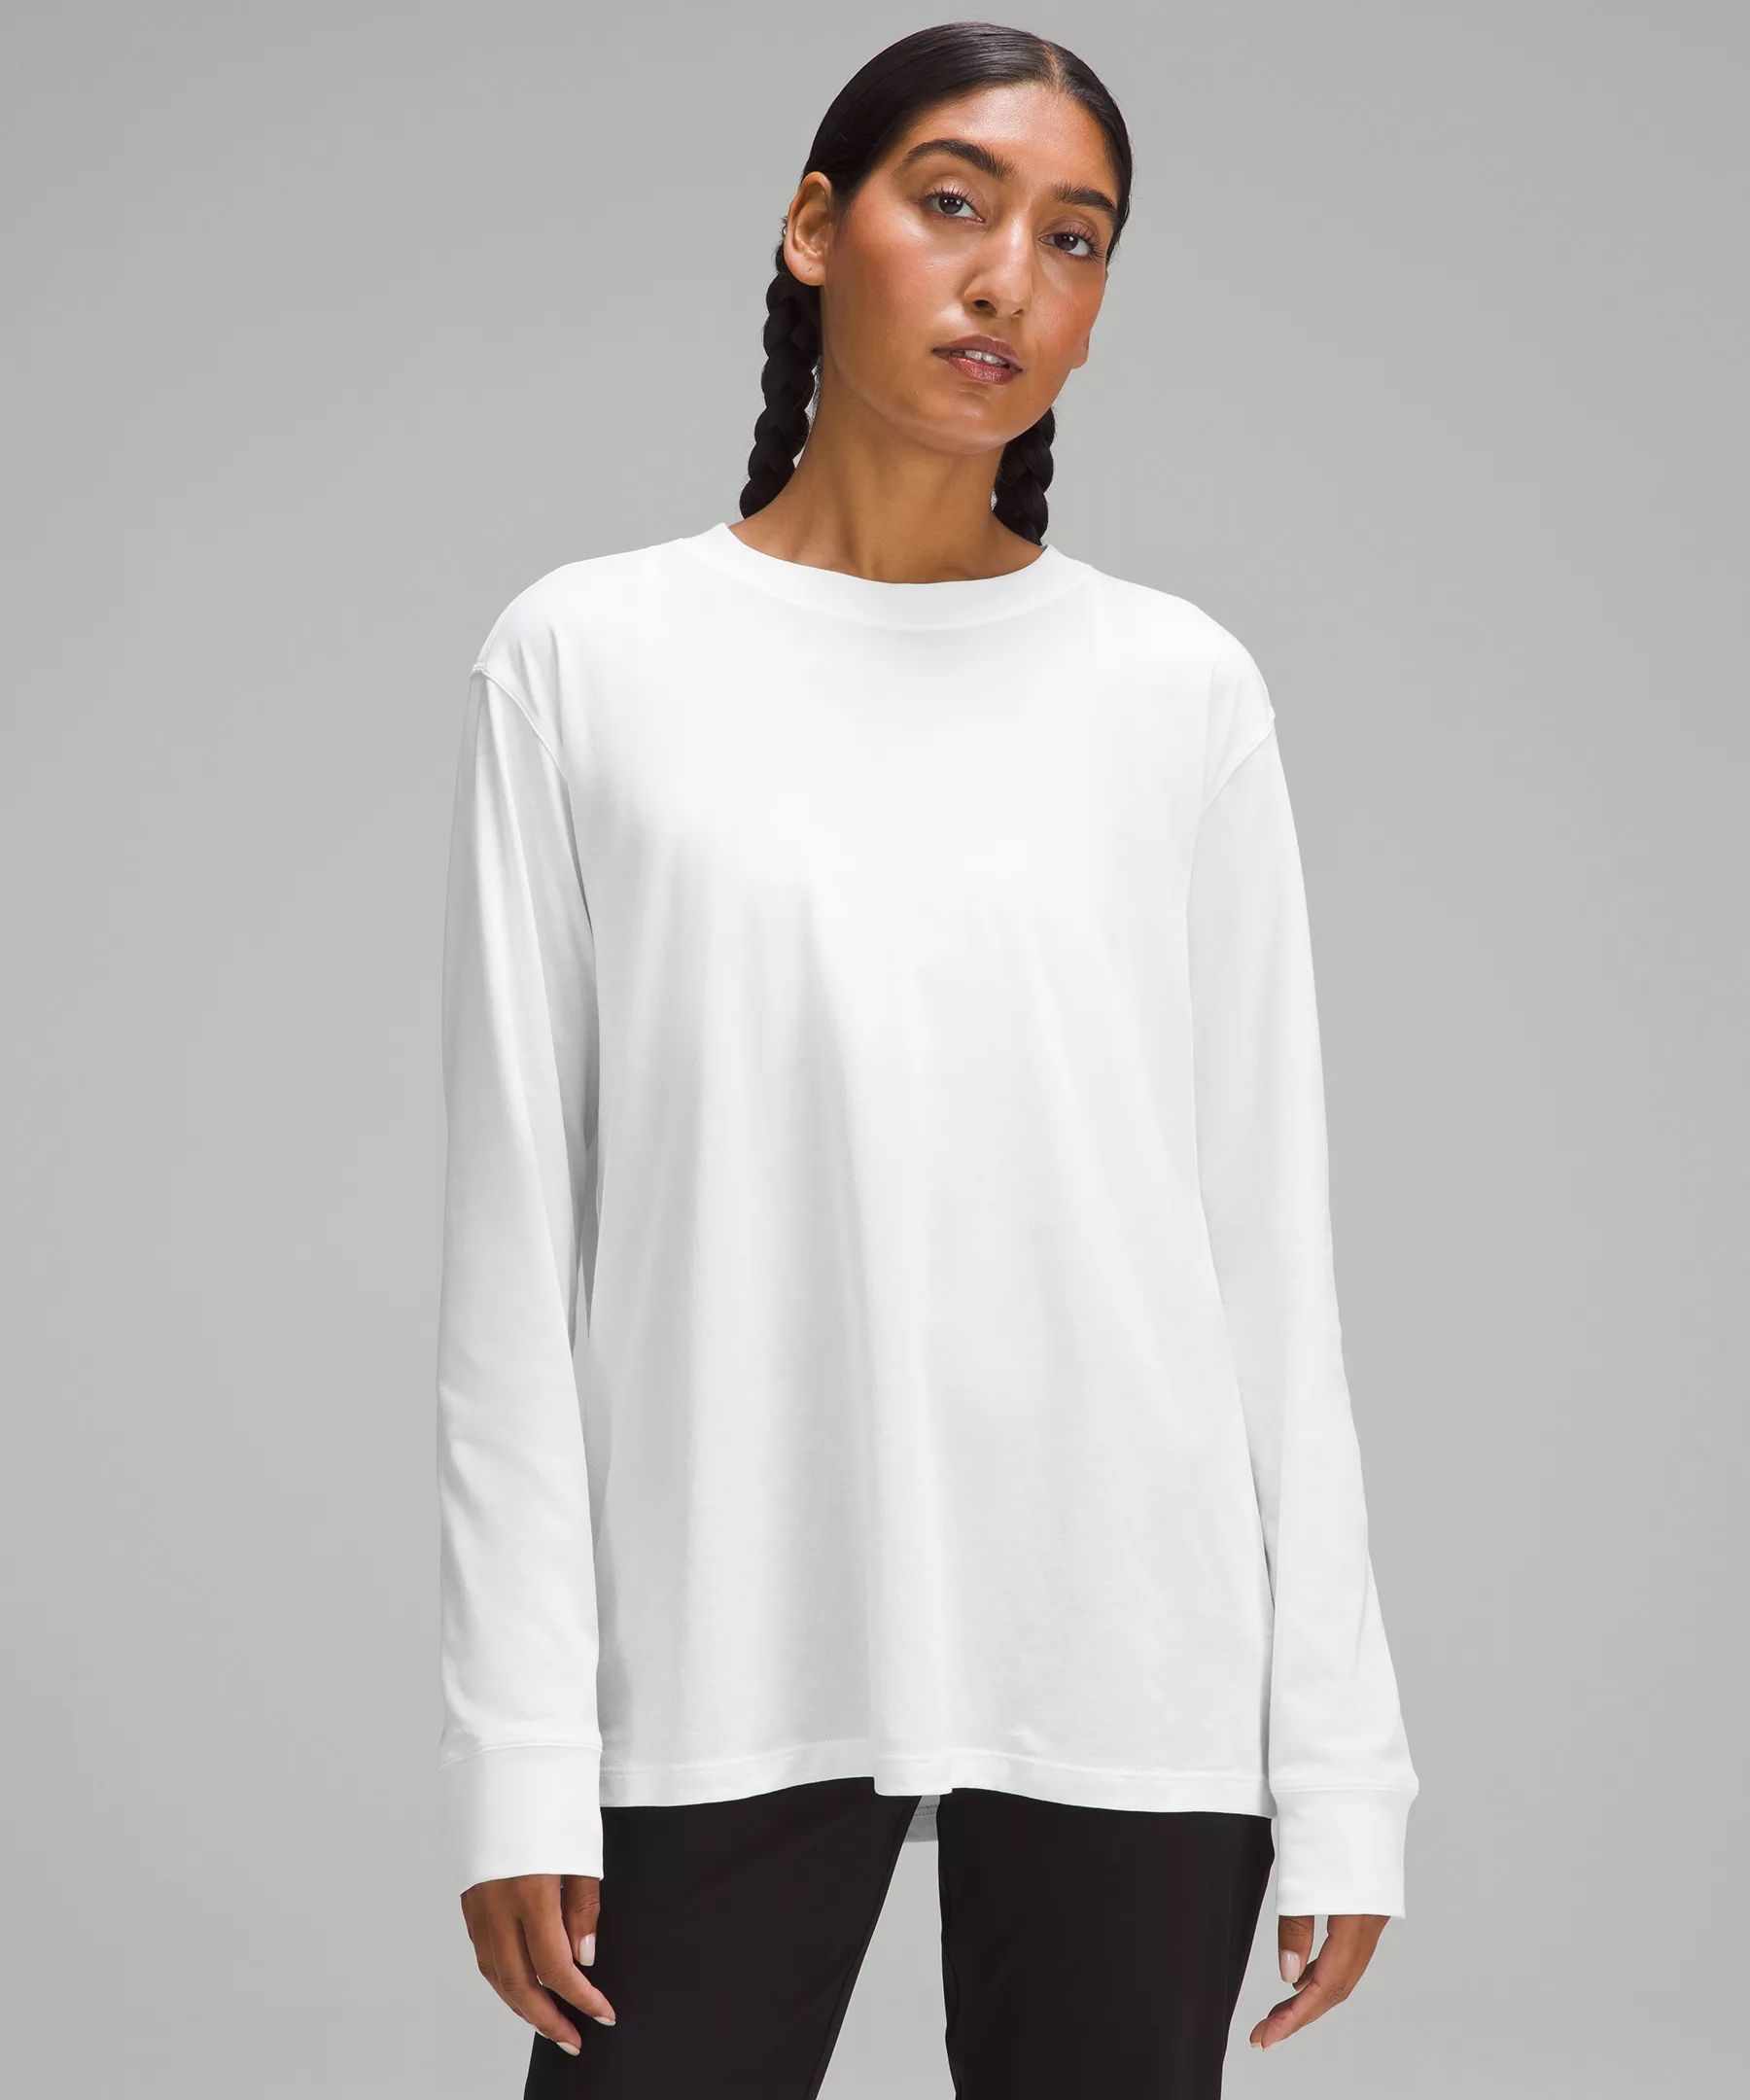 All Yours Long Sleeve Shirt Online Only | Lululemon (US)